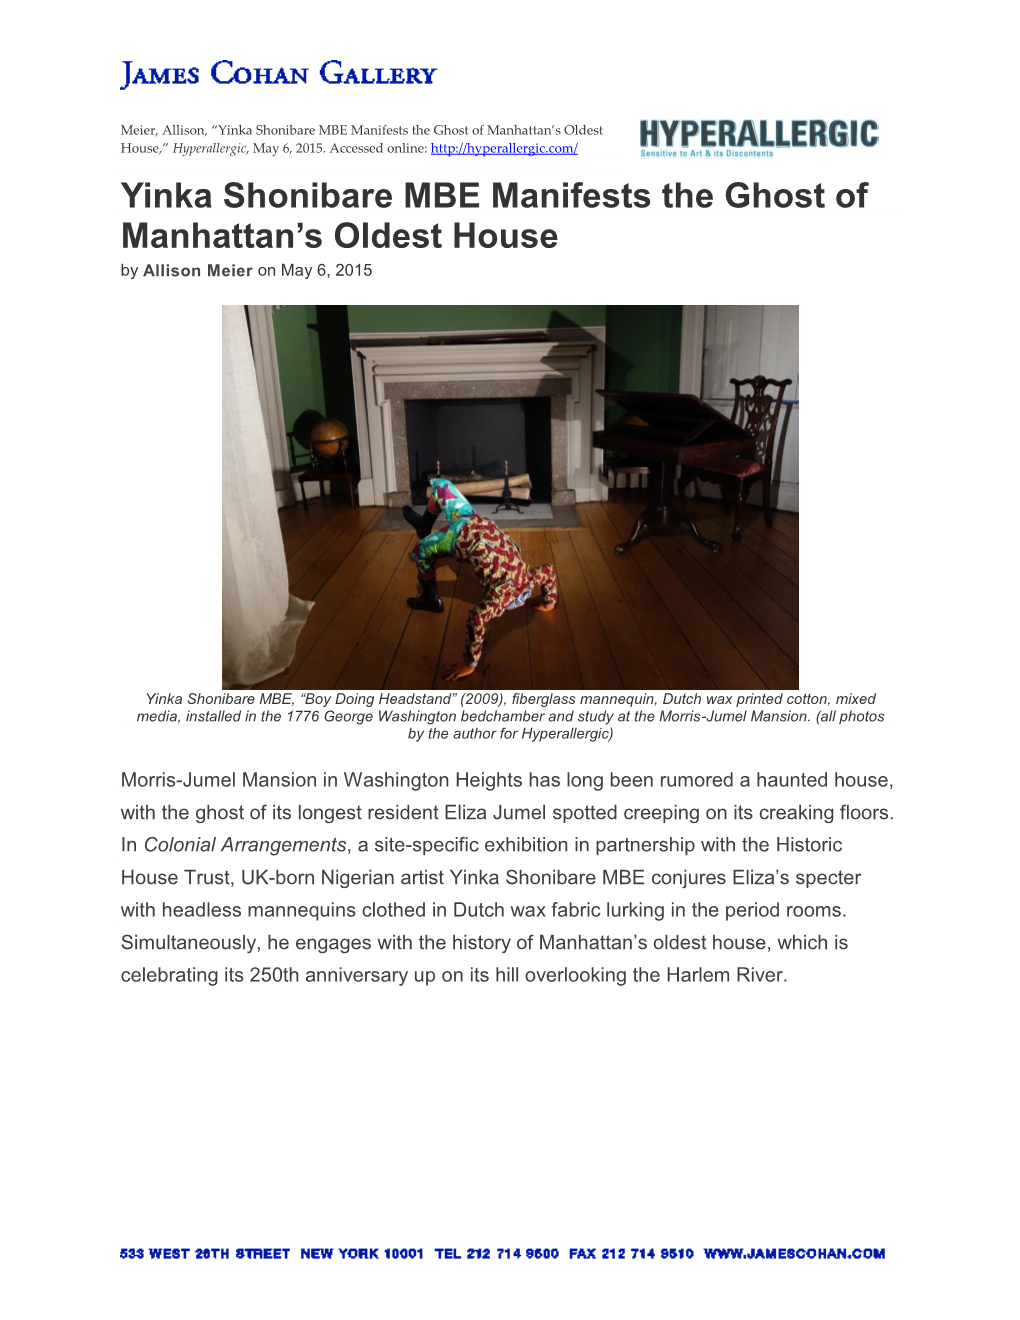 Yinka Shonibare MBE Manifests the Ghost of Manhattan's Oldest House